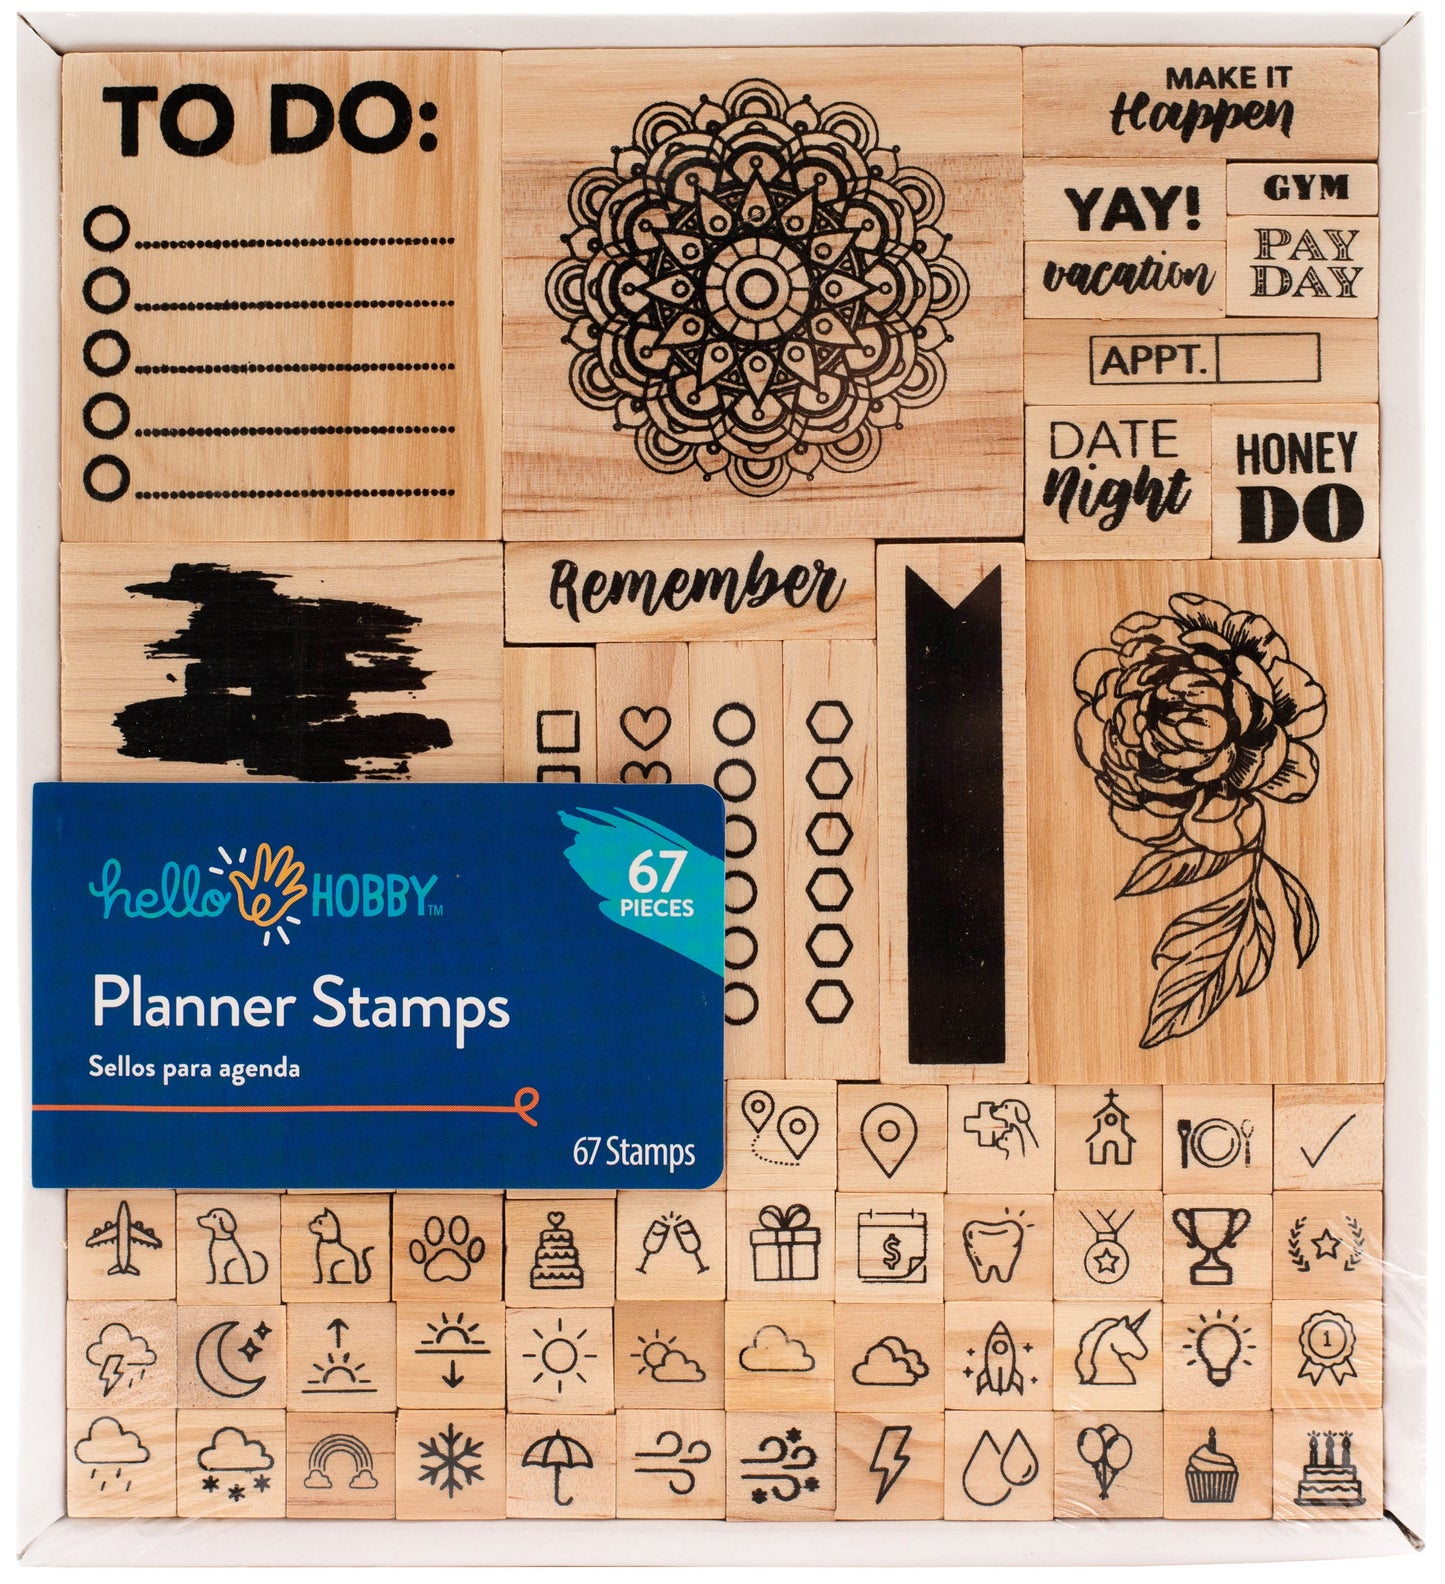 Hello Hobby Planner Stamps